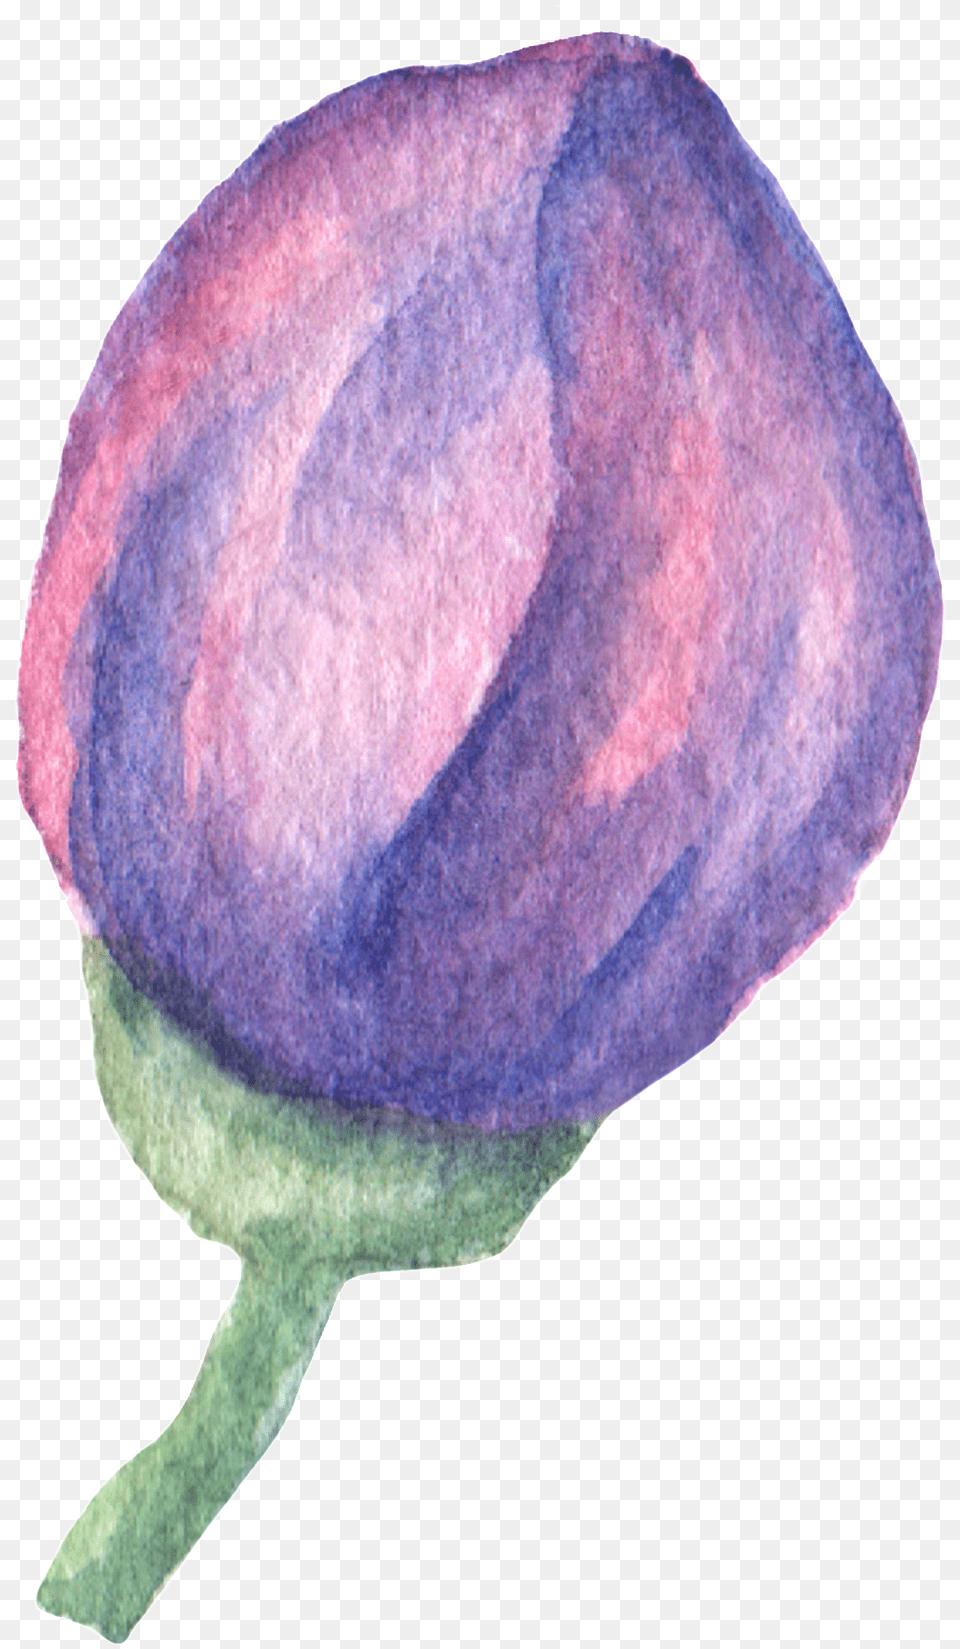 Hand Painted Purple Flowers Flowerbed Watercolor Transparent Watercolor Painting, Sprout, Plant, Petal, Hat Png Image